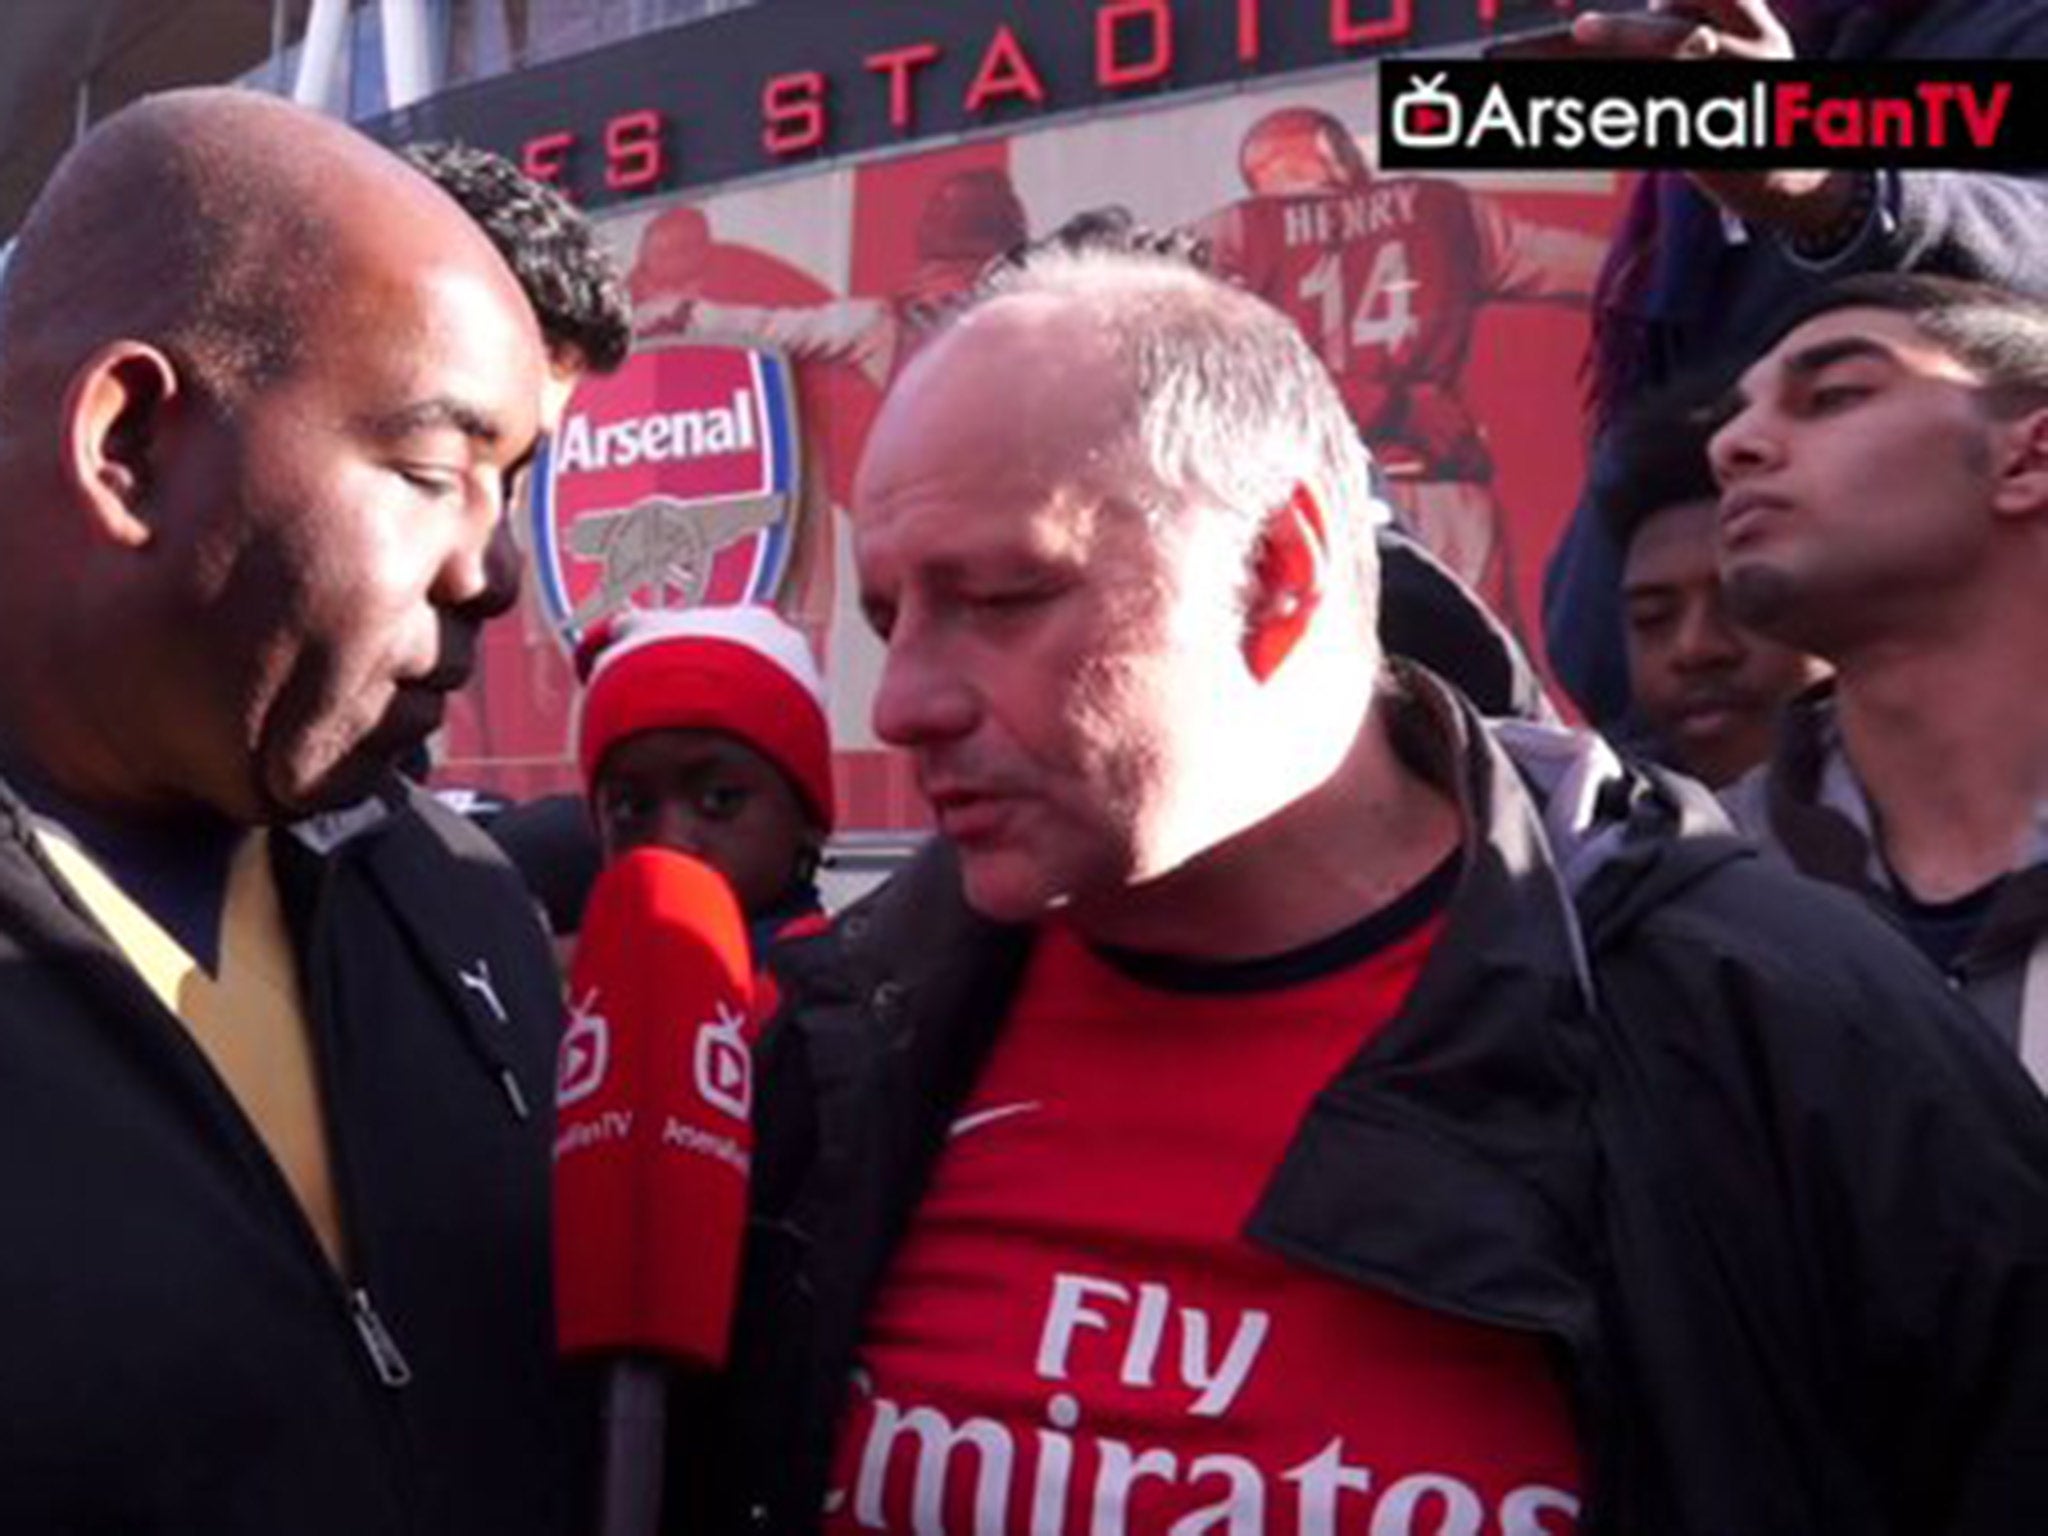 Arsenal fan Claude (right) has been missing since 11:30am on Thursday morning